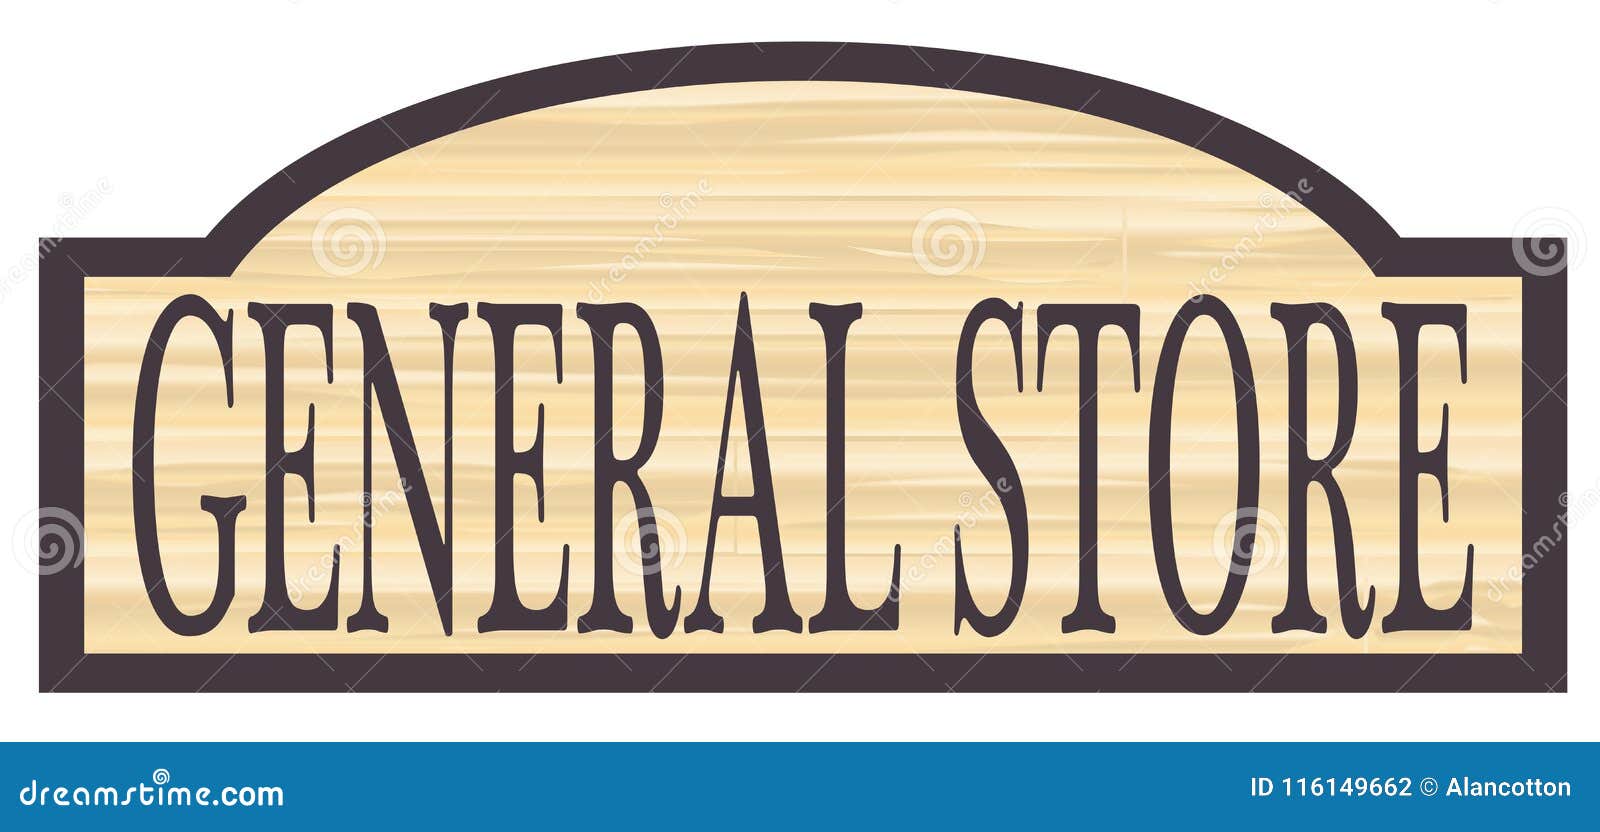 Wooden General Store Sign stock vector. Illustration of wood - 116149662